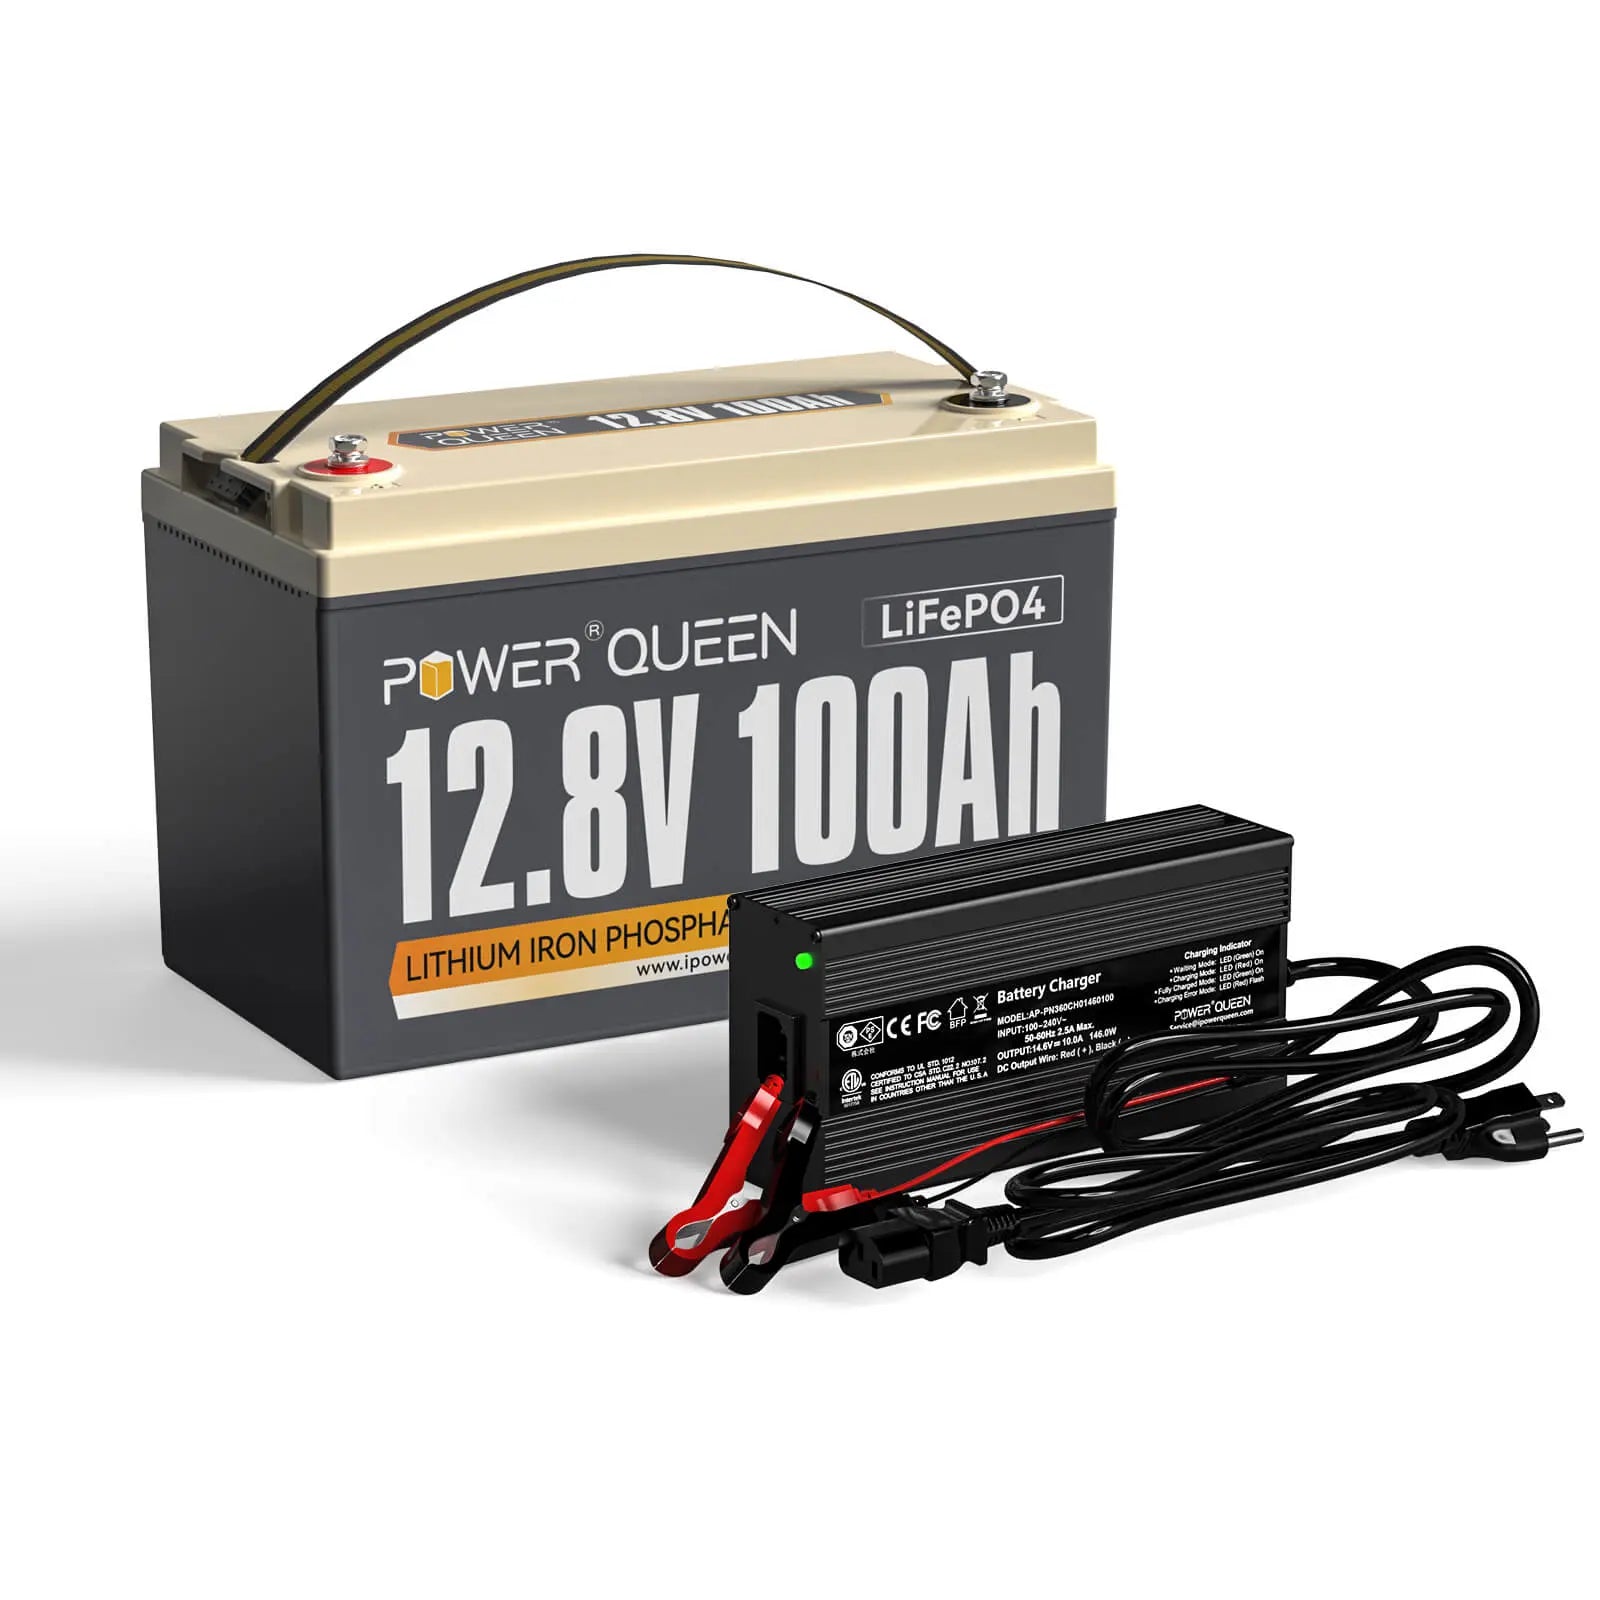 Power Queen 12.8V 100Ah LiFePO4 Battery + 14.6V 10A Charger